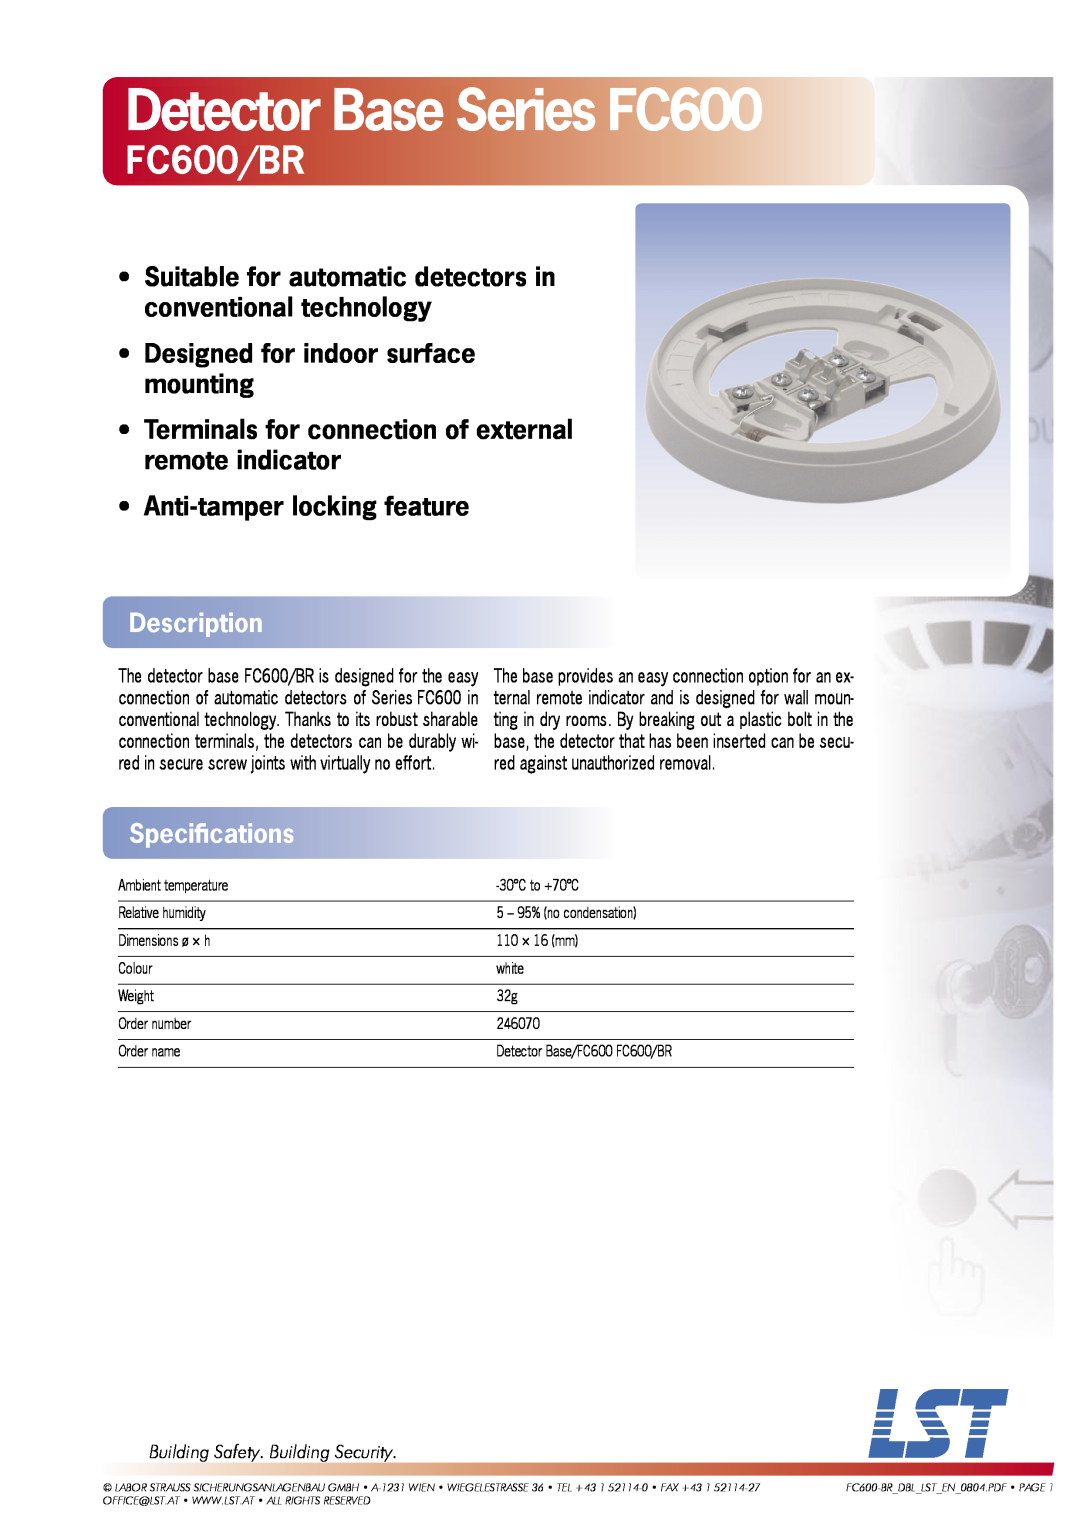 LST specifications Detector Base Series FC600, FC600/BR, Designed for indoor surface mounting, Description 